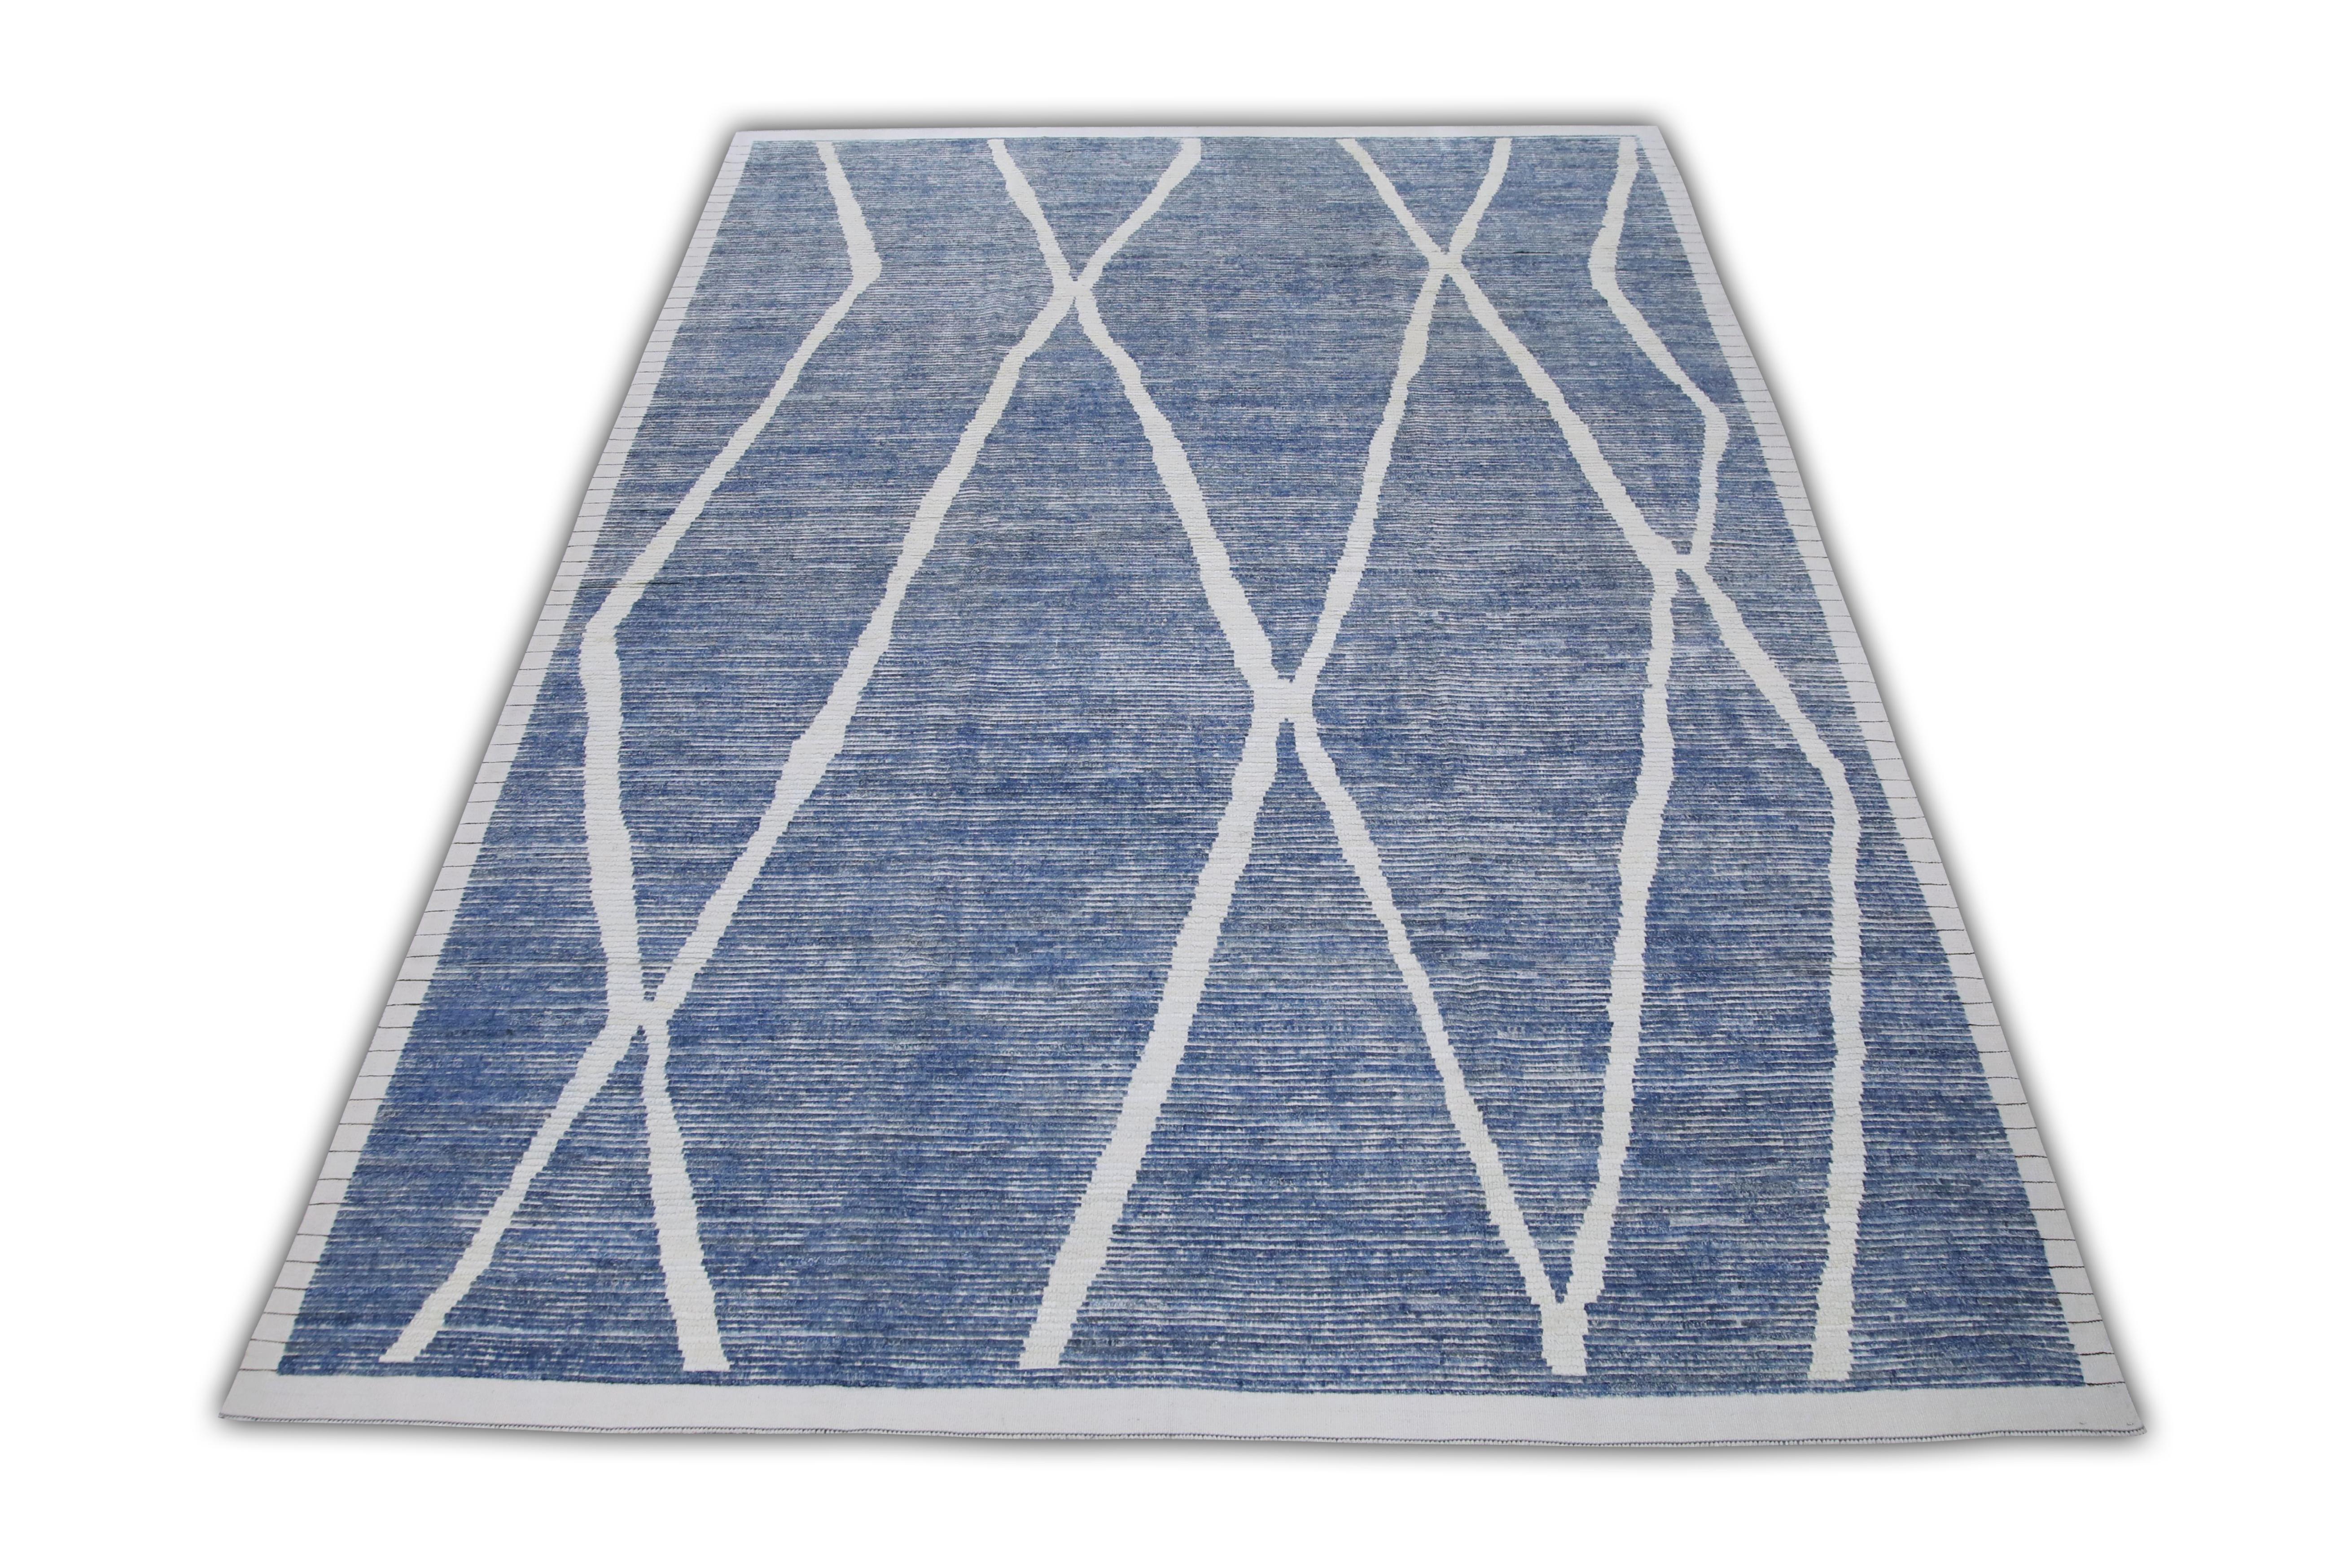 A stunning modern Turkish Tulu rug that is sure to add a touch of warmth and luxury to any space. This rug has been meticulously handwoven using traditional techniques, ensuring its quality and durability.

The rug is made with 100% natural